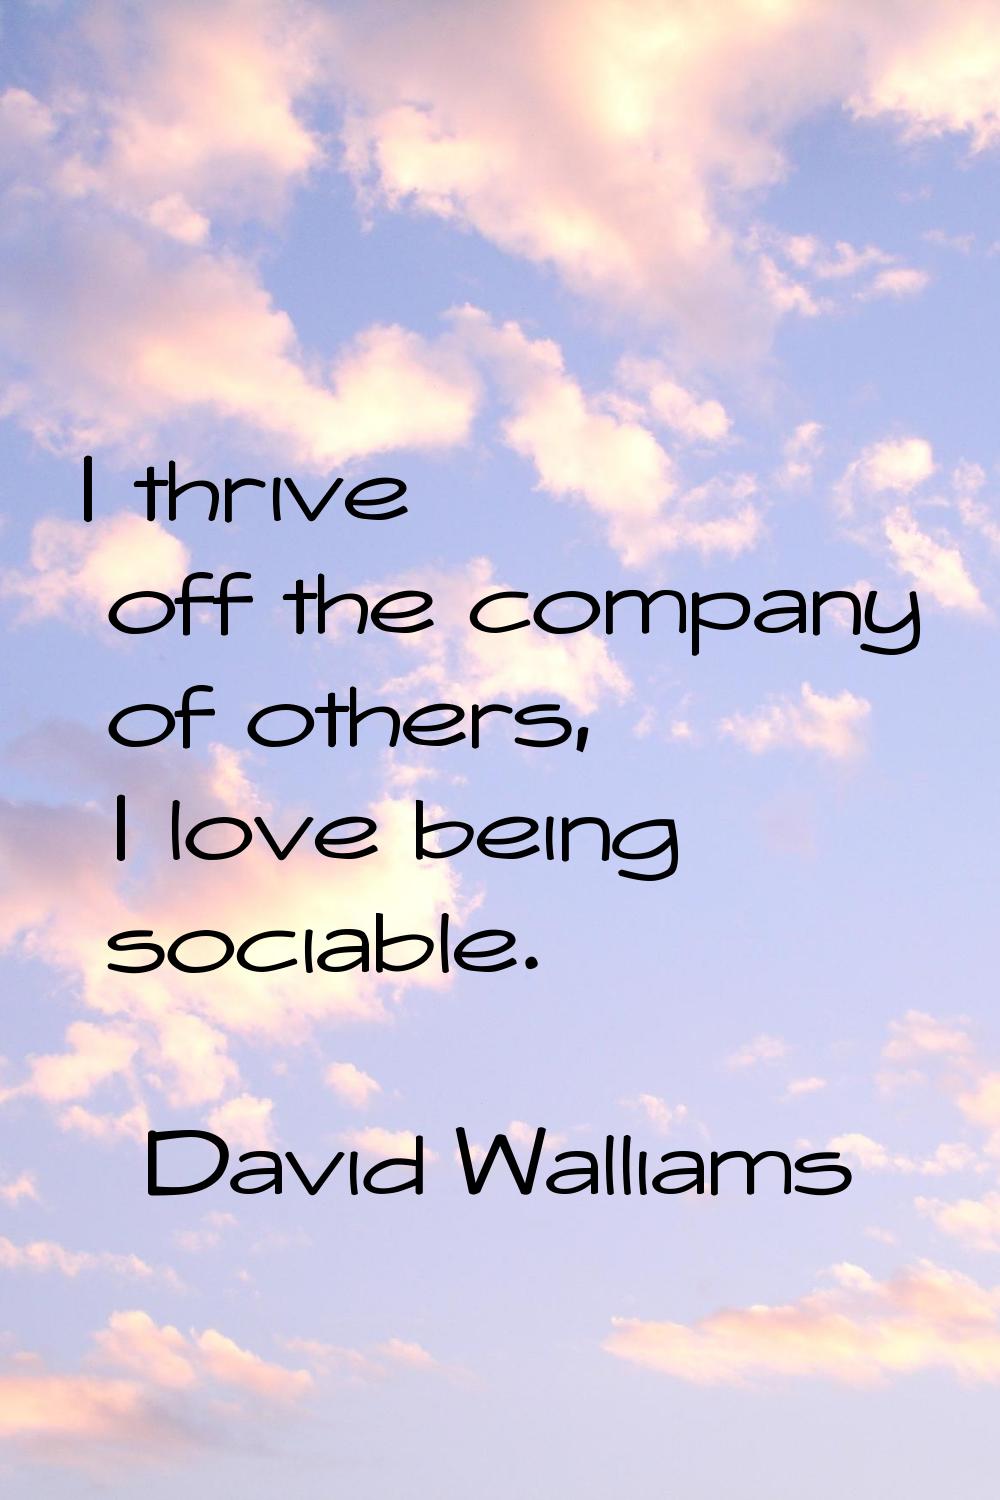 I thrive off the company of others, I love being sociable.